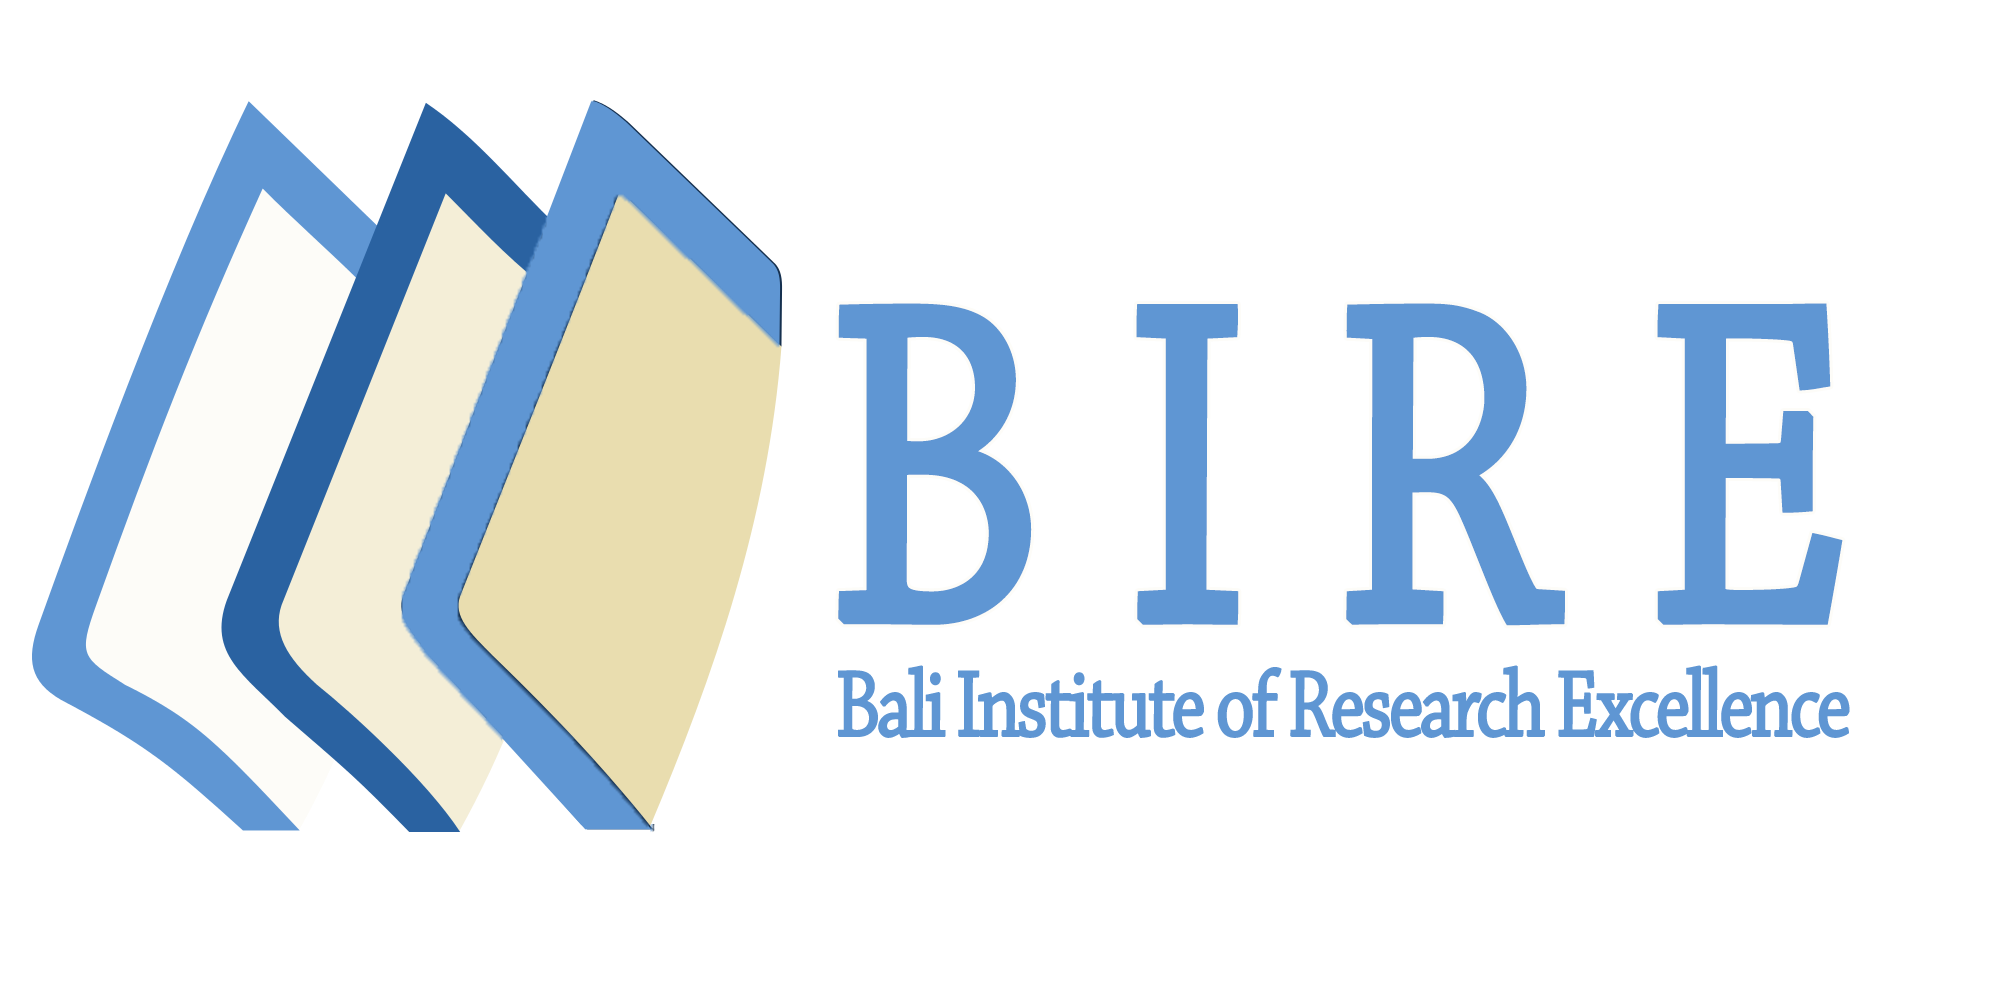 EBMS-2021 3rd International Conference on Research Perspectives on Entrepreneurship Education, Business Management and Social Sciences EBMS